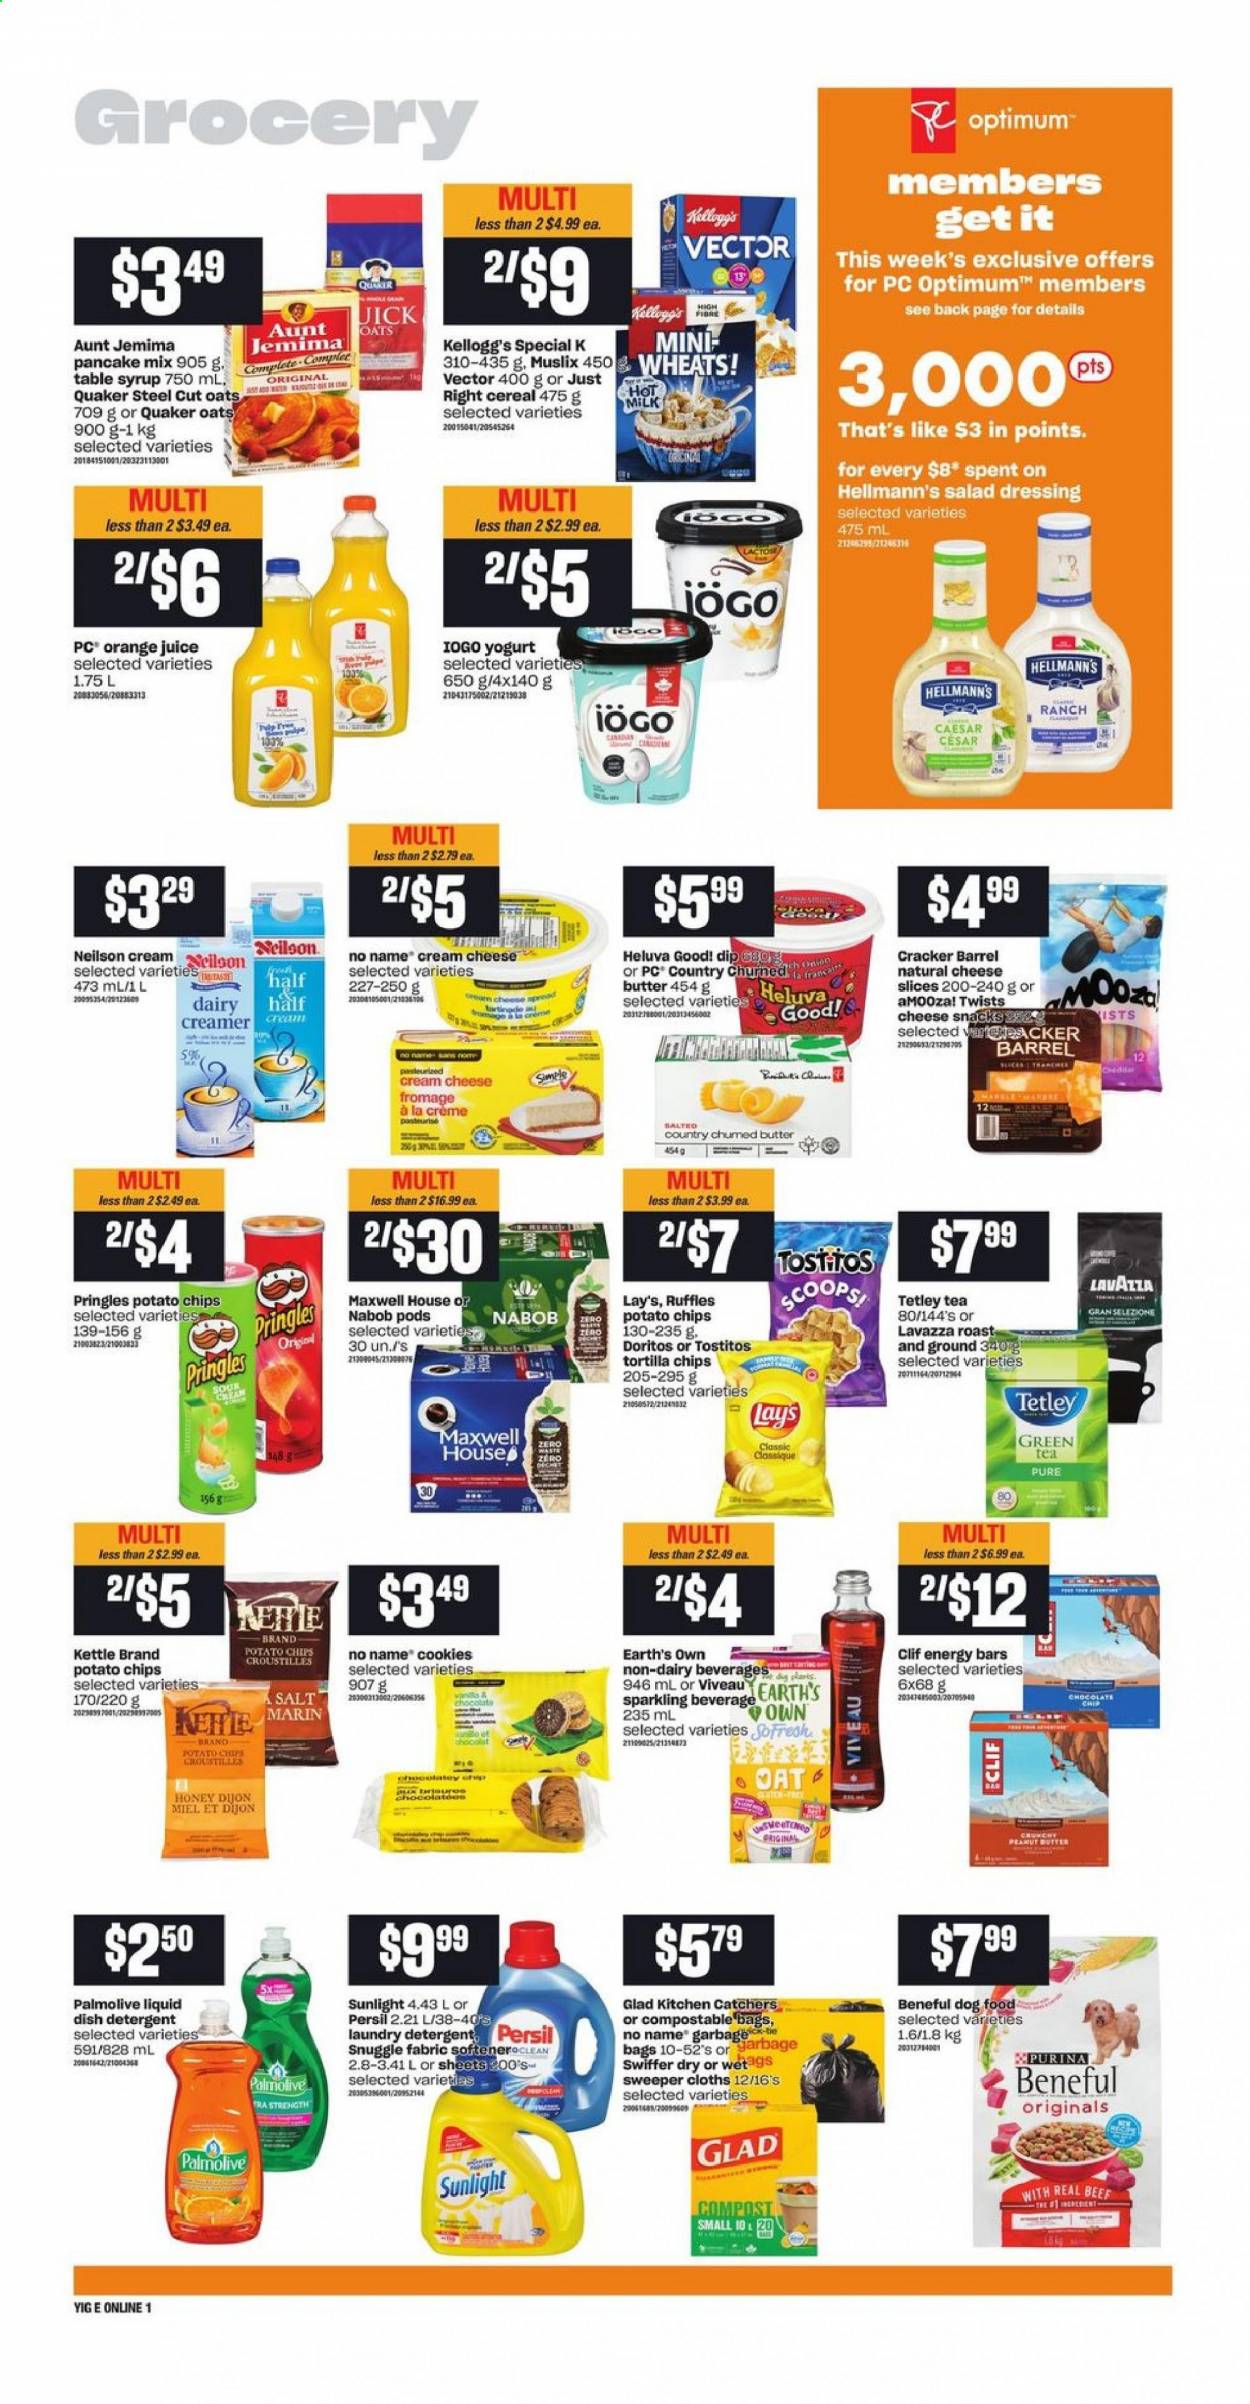 thumbnail - Circulaire Independent - 15 Avril 2021 - 21 Avril 2021 - Produits soldés - Caesar, fromage, cookies, chips, tortilla chips, Pringles, Lay’s, persil, Purina, Sunlight, Kellogg's, Palmolive, Lavazza, détergent. Page 5.